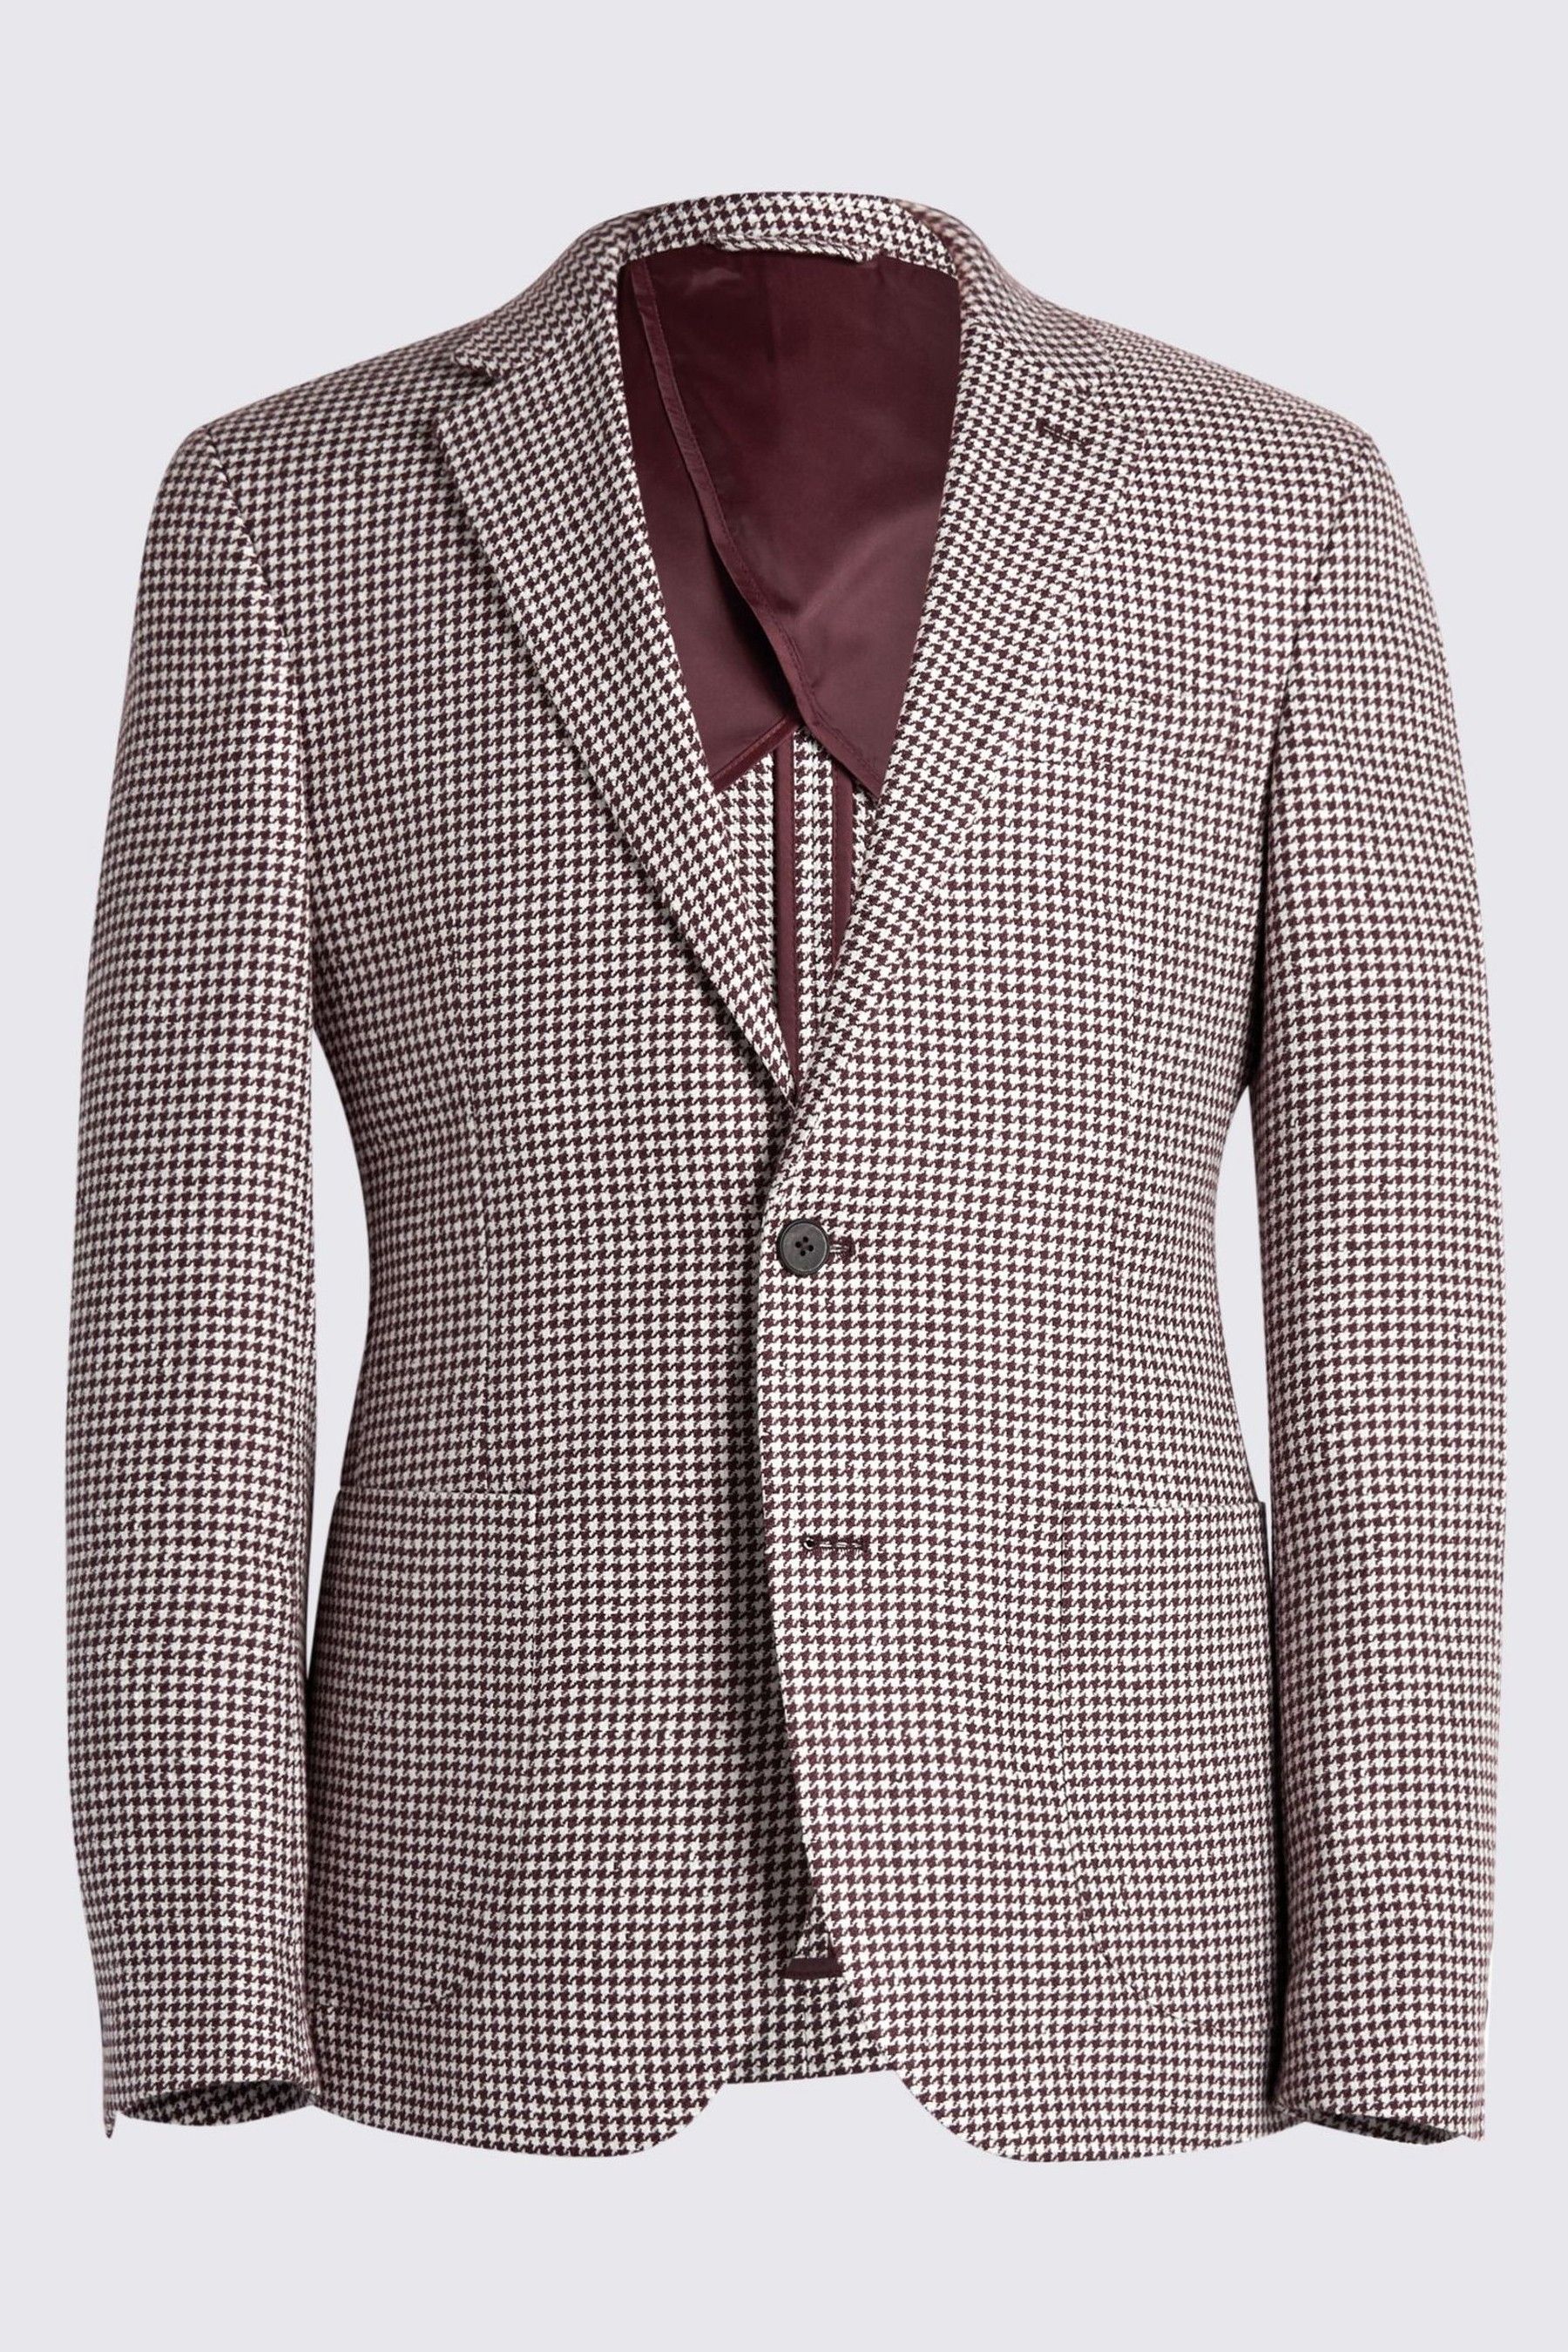 MOSS Tailored Fit Houndstooth Jacket - Image 6 of 6